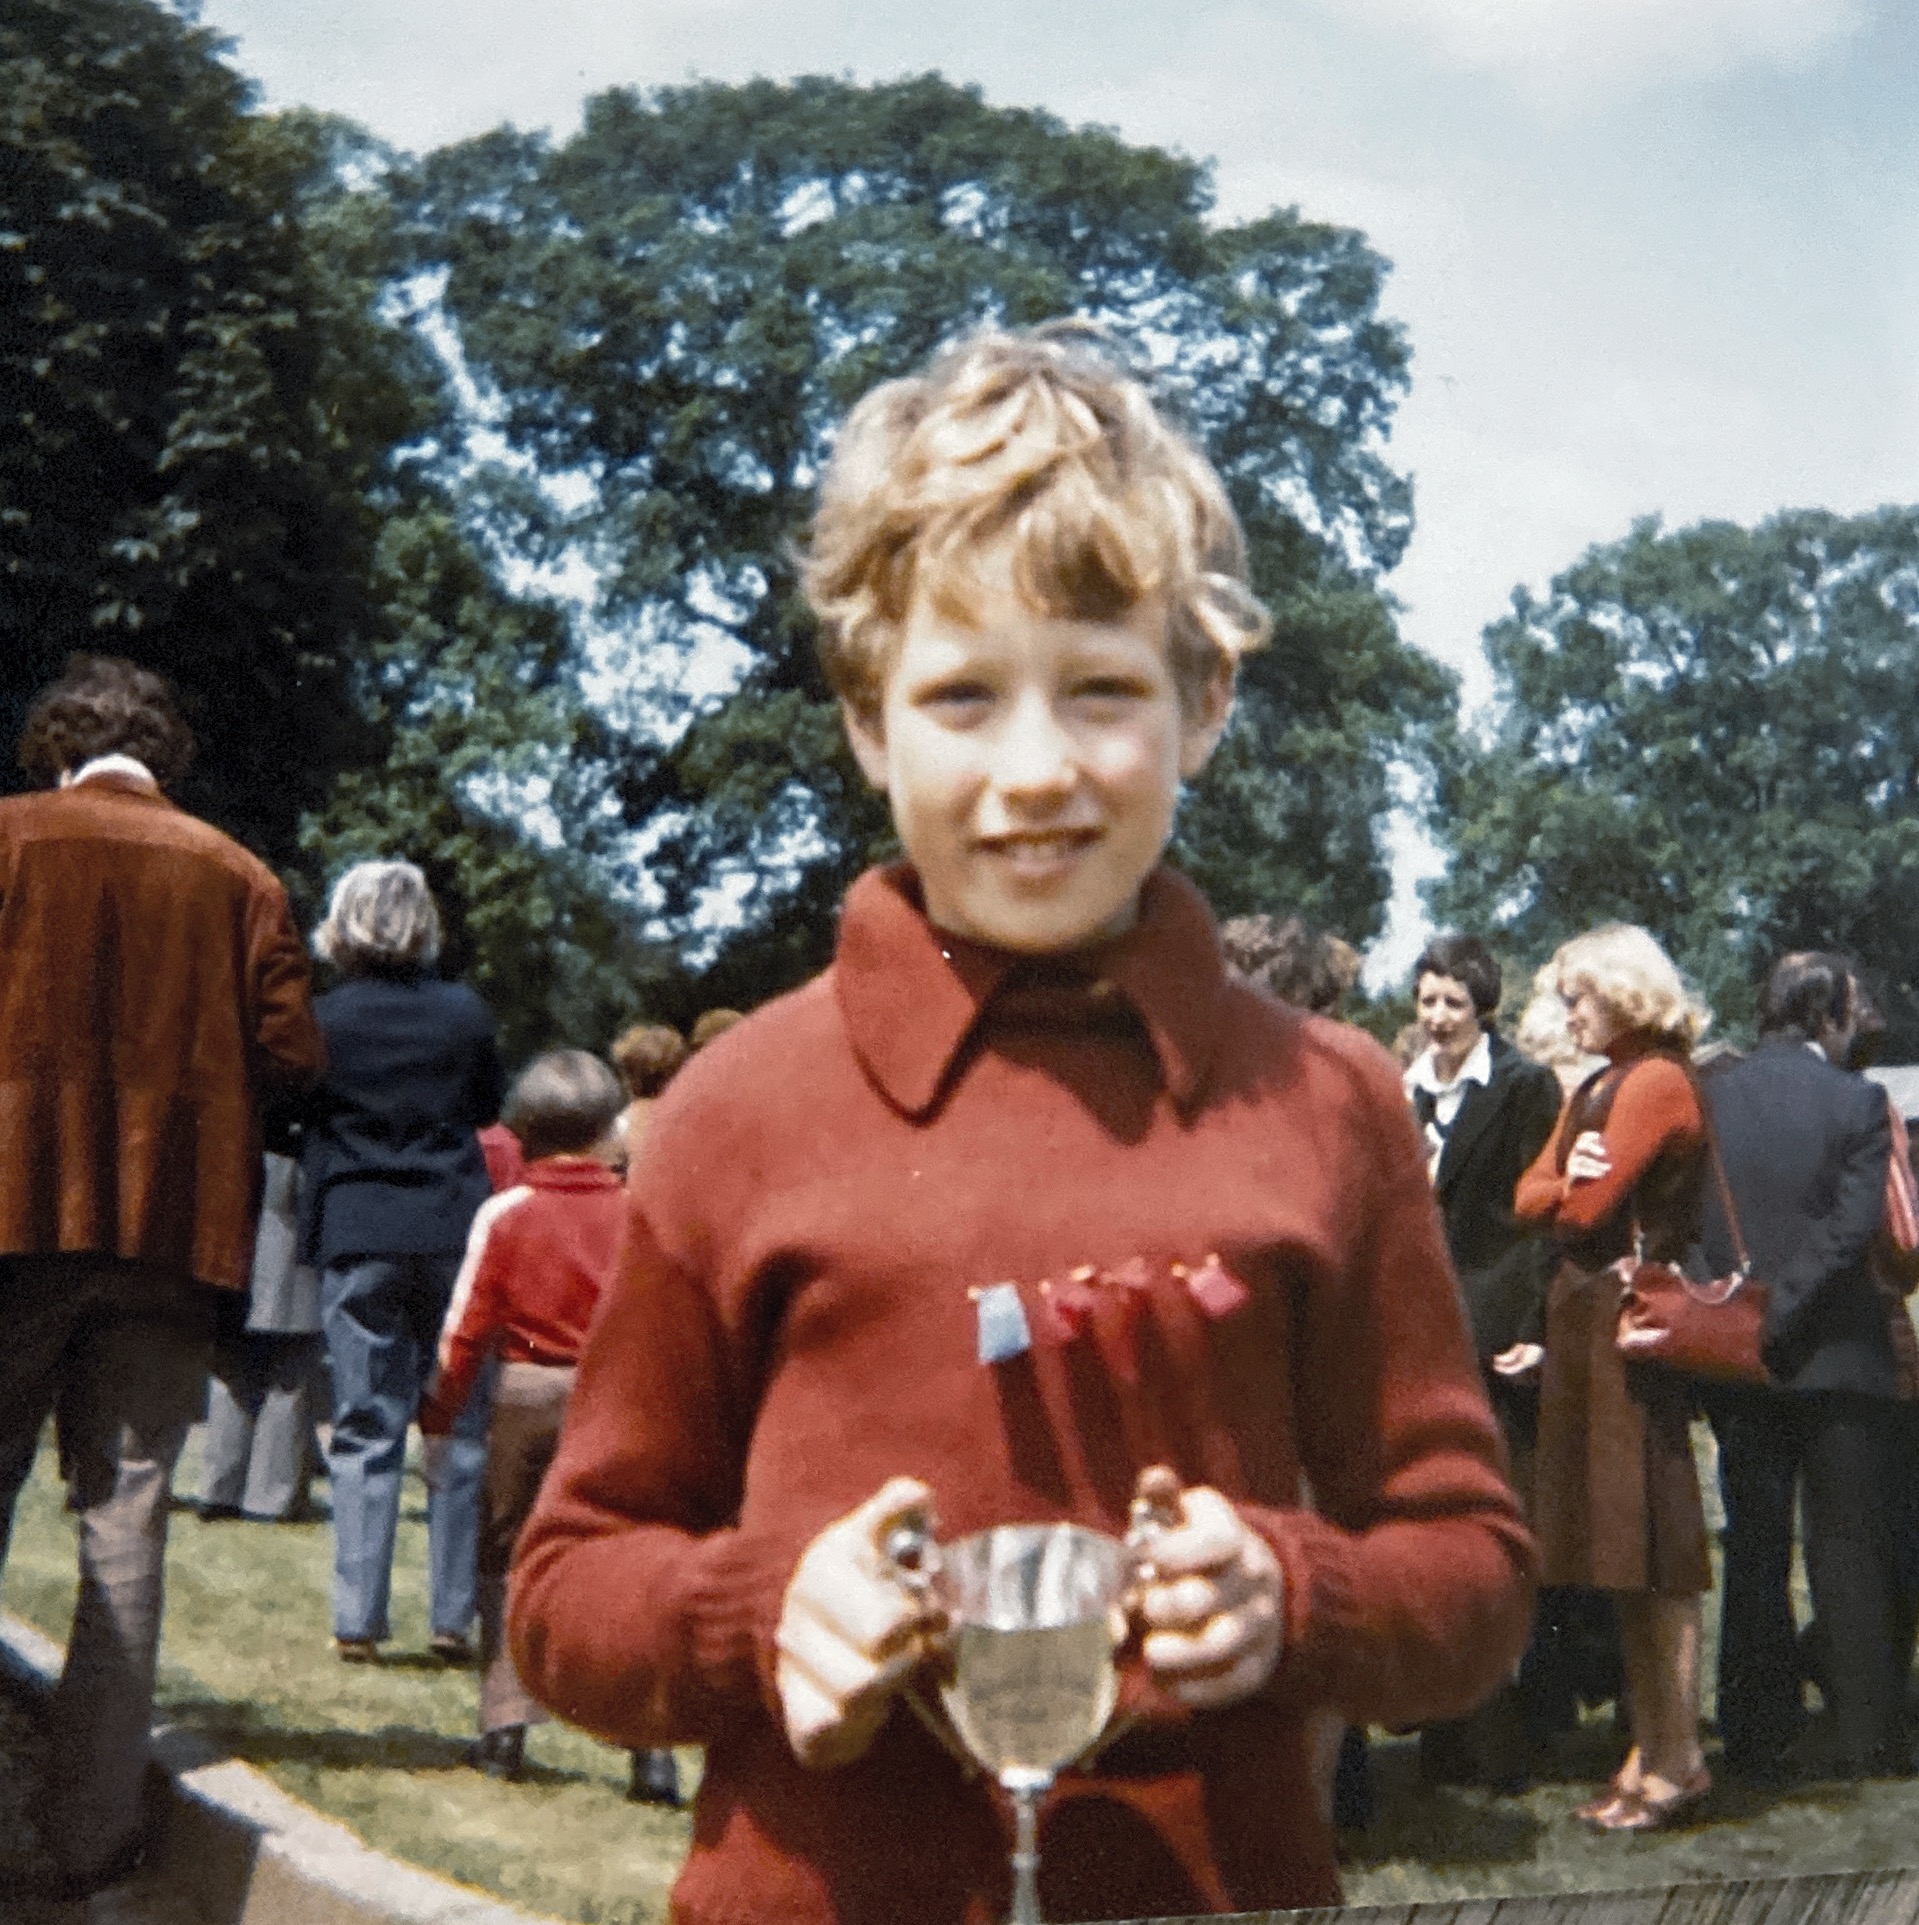 Sports Day 1977